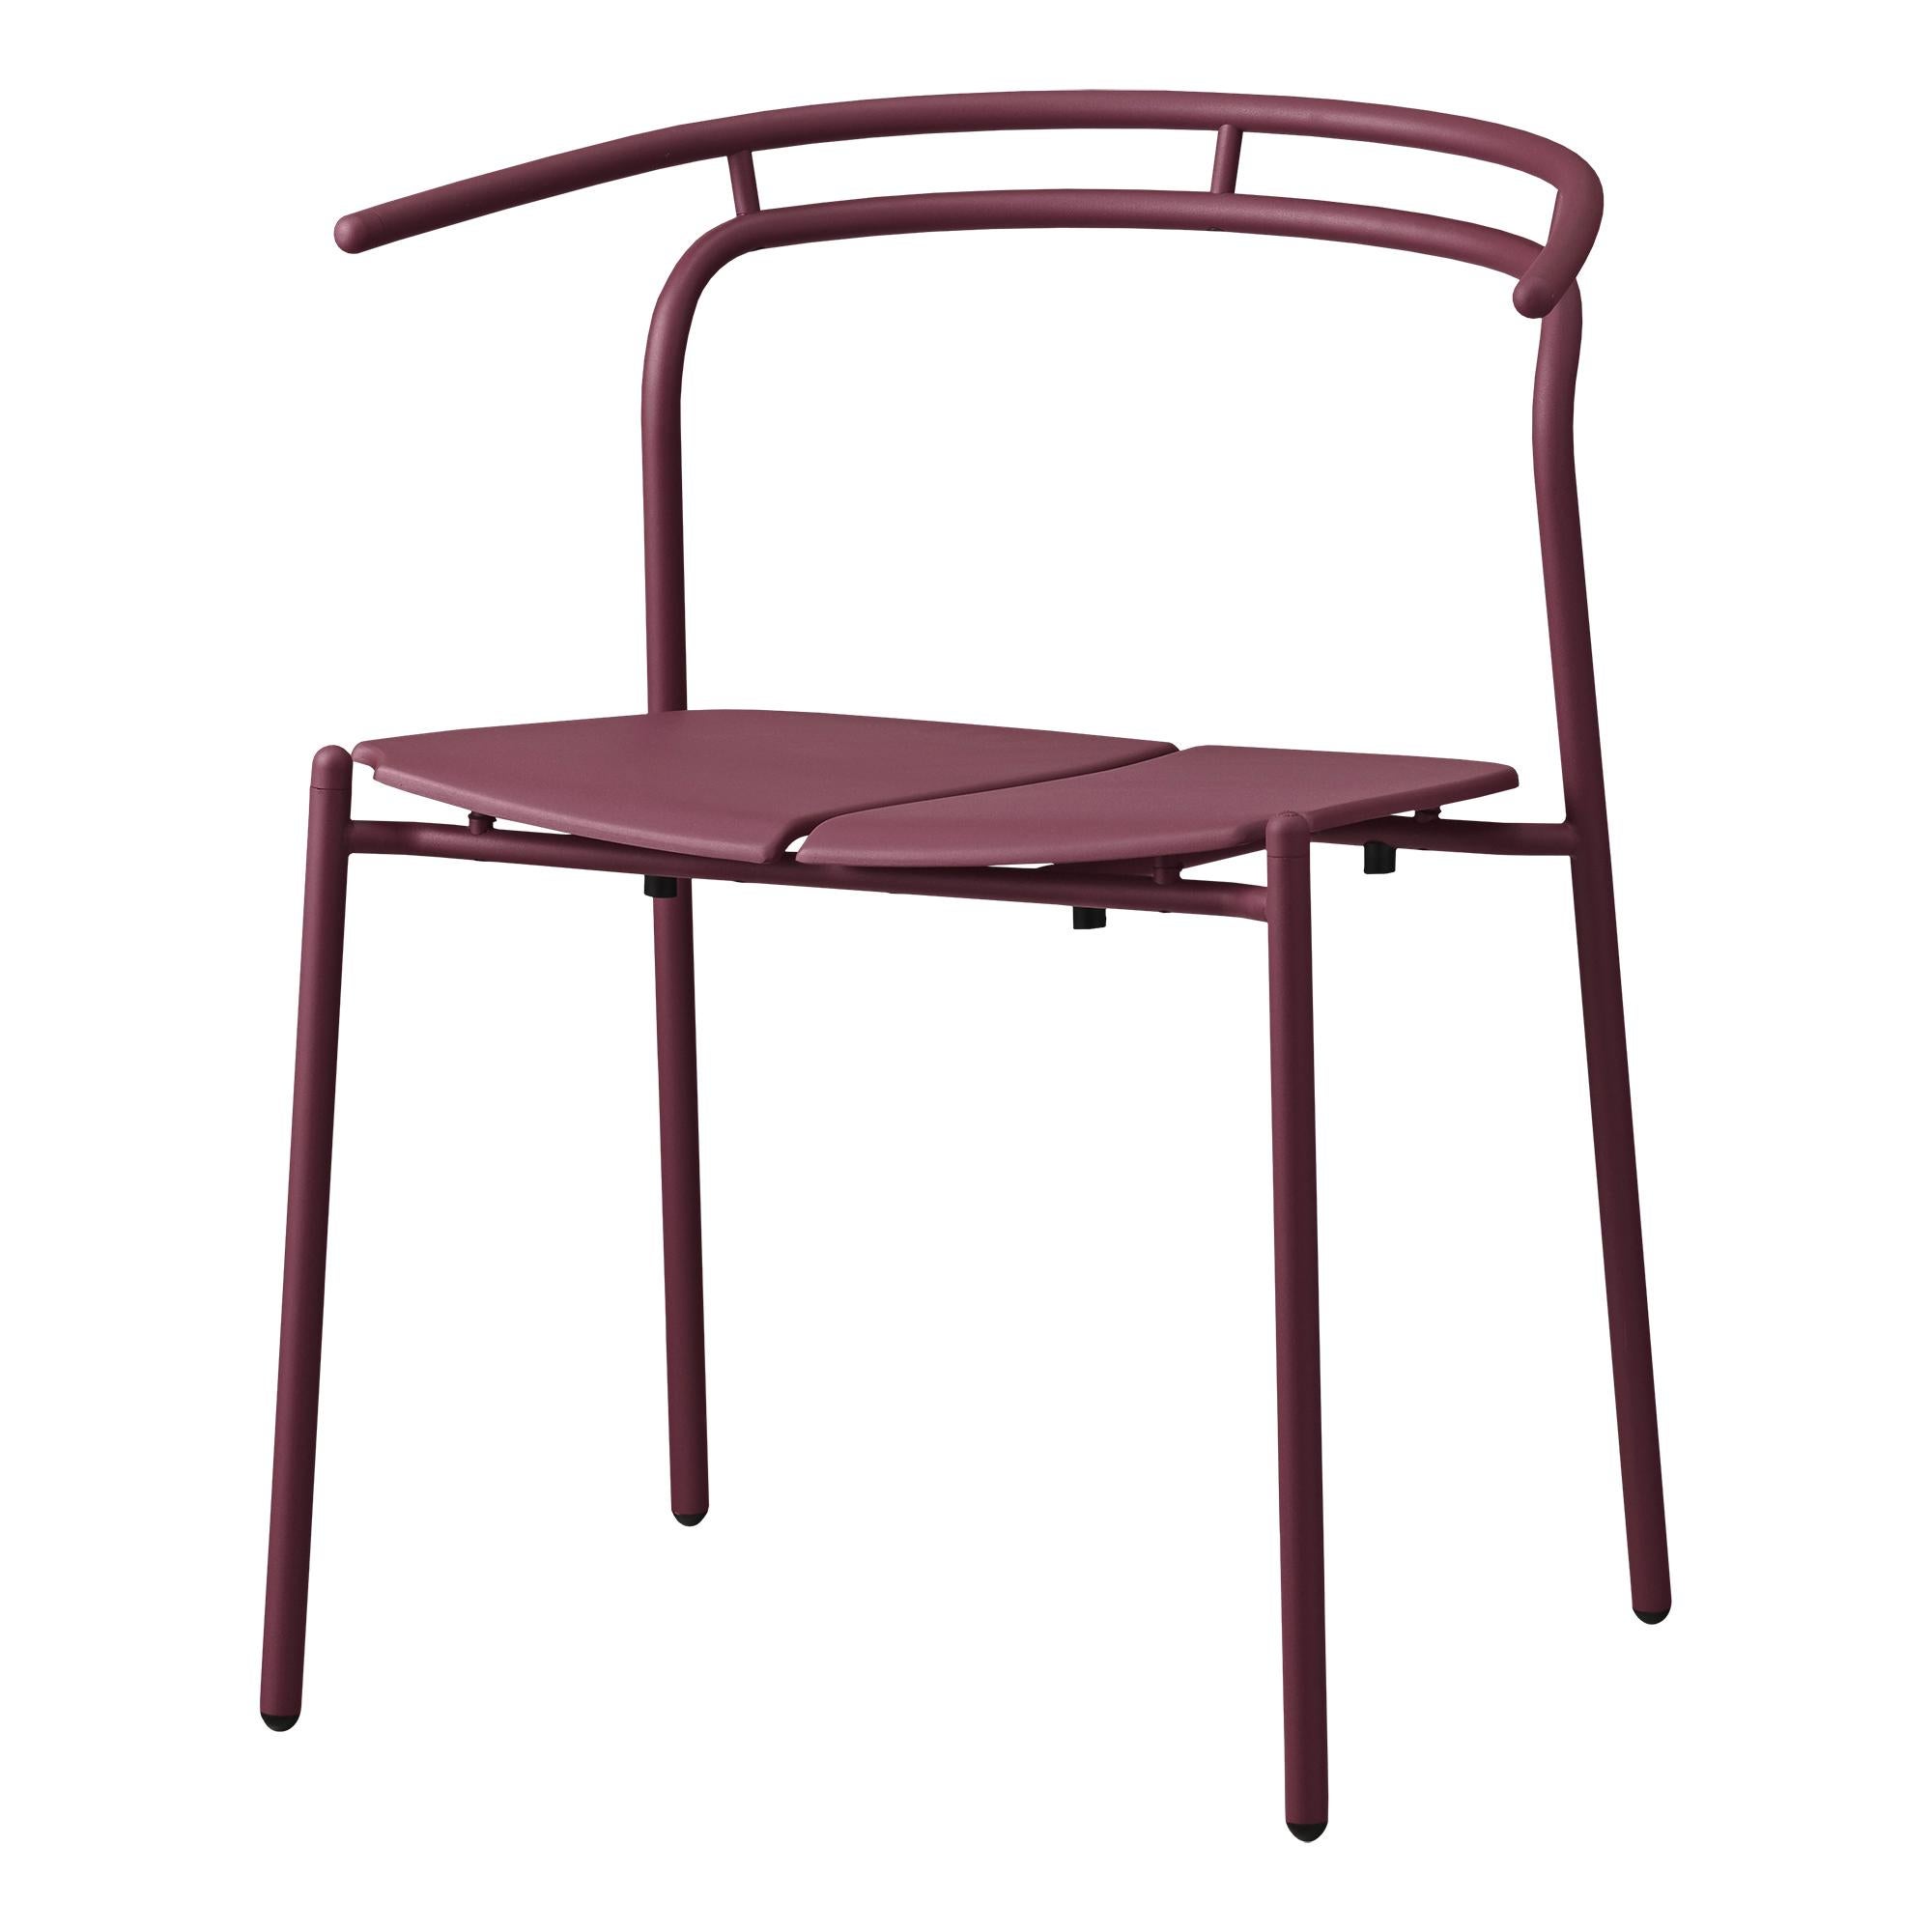 Bordeaux minimalist dining chair
Dimensions: D 53.9 x W 62.5 x H 74.6 cm 
Materials: Steel w. Matte powder coating & aluminum w. Matte powder coating.
Available in colors: Taupe, bordeaux, forest, ginger bread, black and, black and